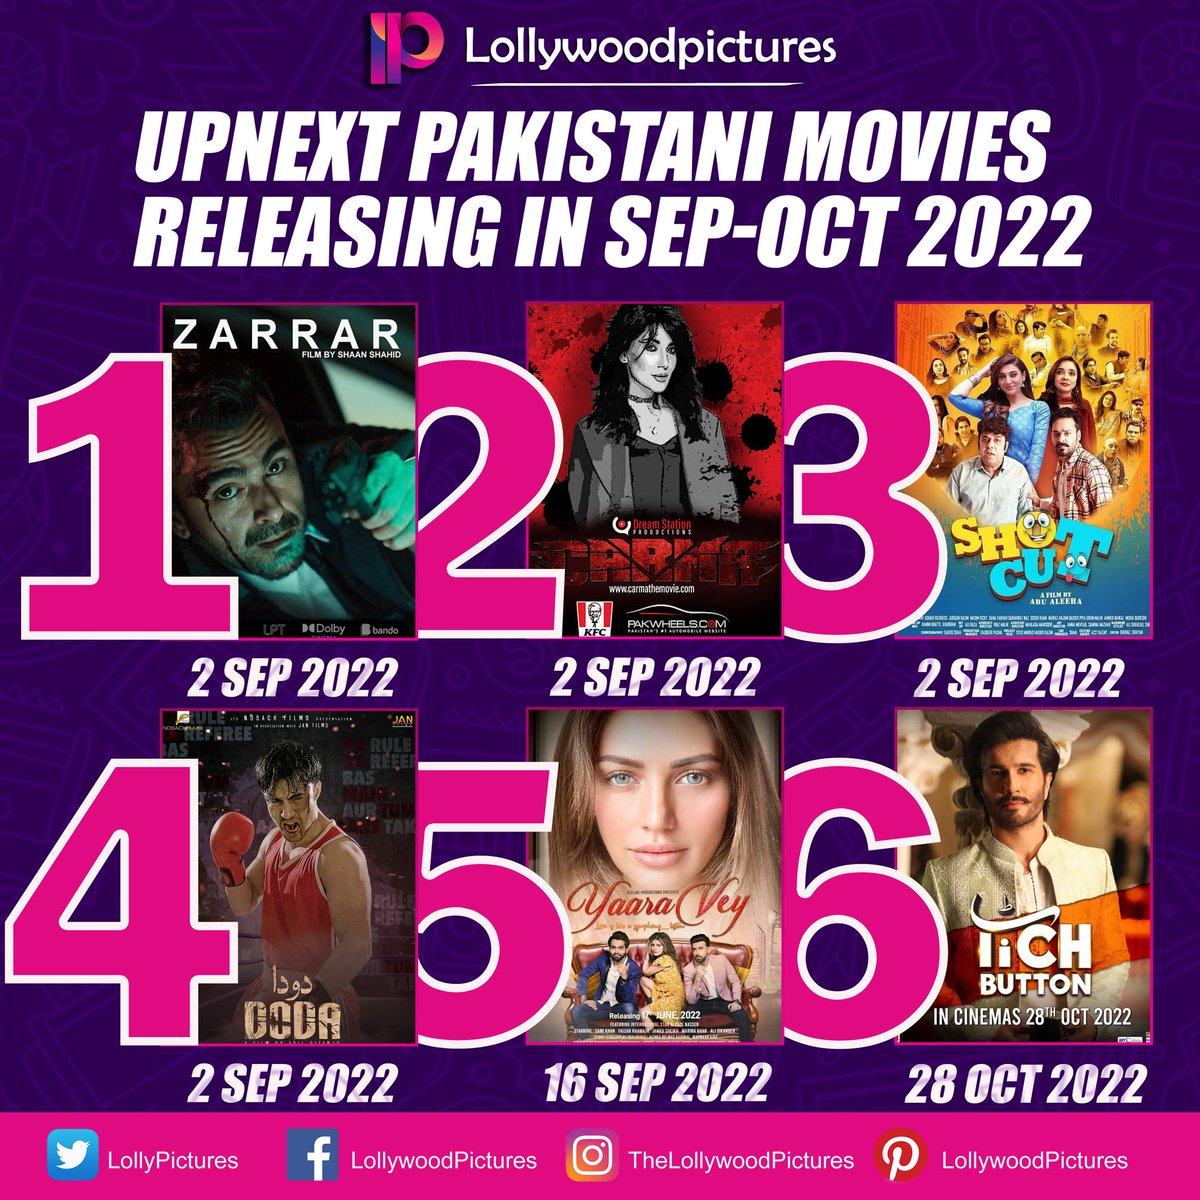 Few more Pakistani Movies are ready for release and grace the Cinemas in September-October 2022. Checkout the list below to get your dates right. 

#LollywoodPictures #LollywoodMovies #Movies #Zarrar #DodaTheMovie #ShotCut #YaaraVeyTheFilm #CarmaTheMovie #TichButton